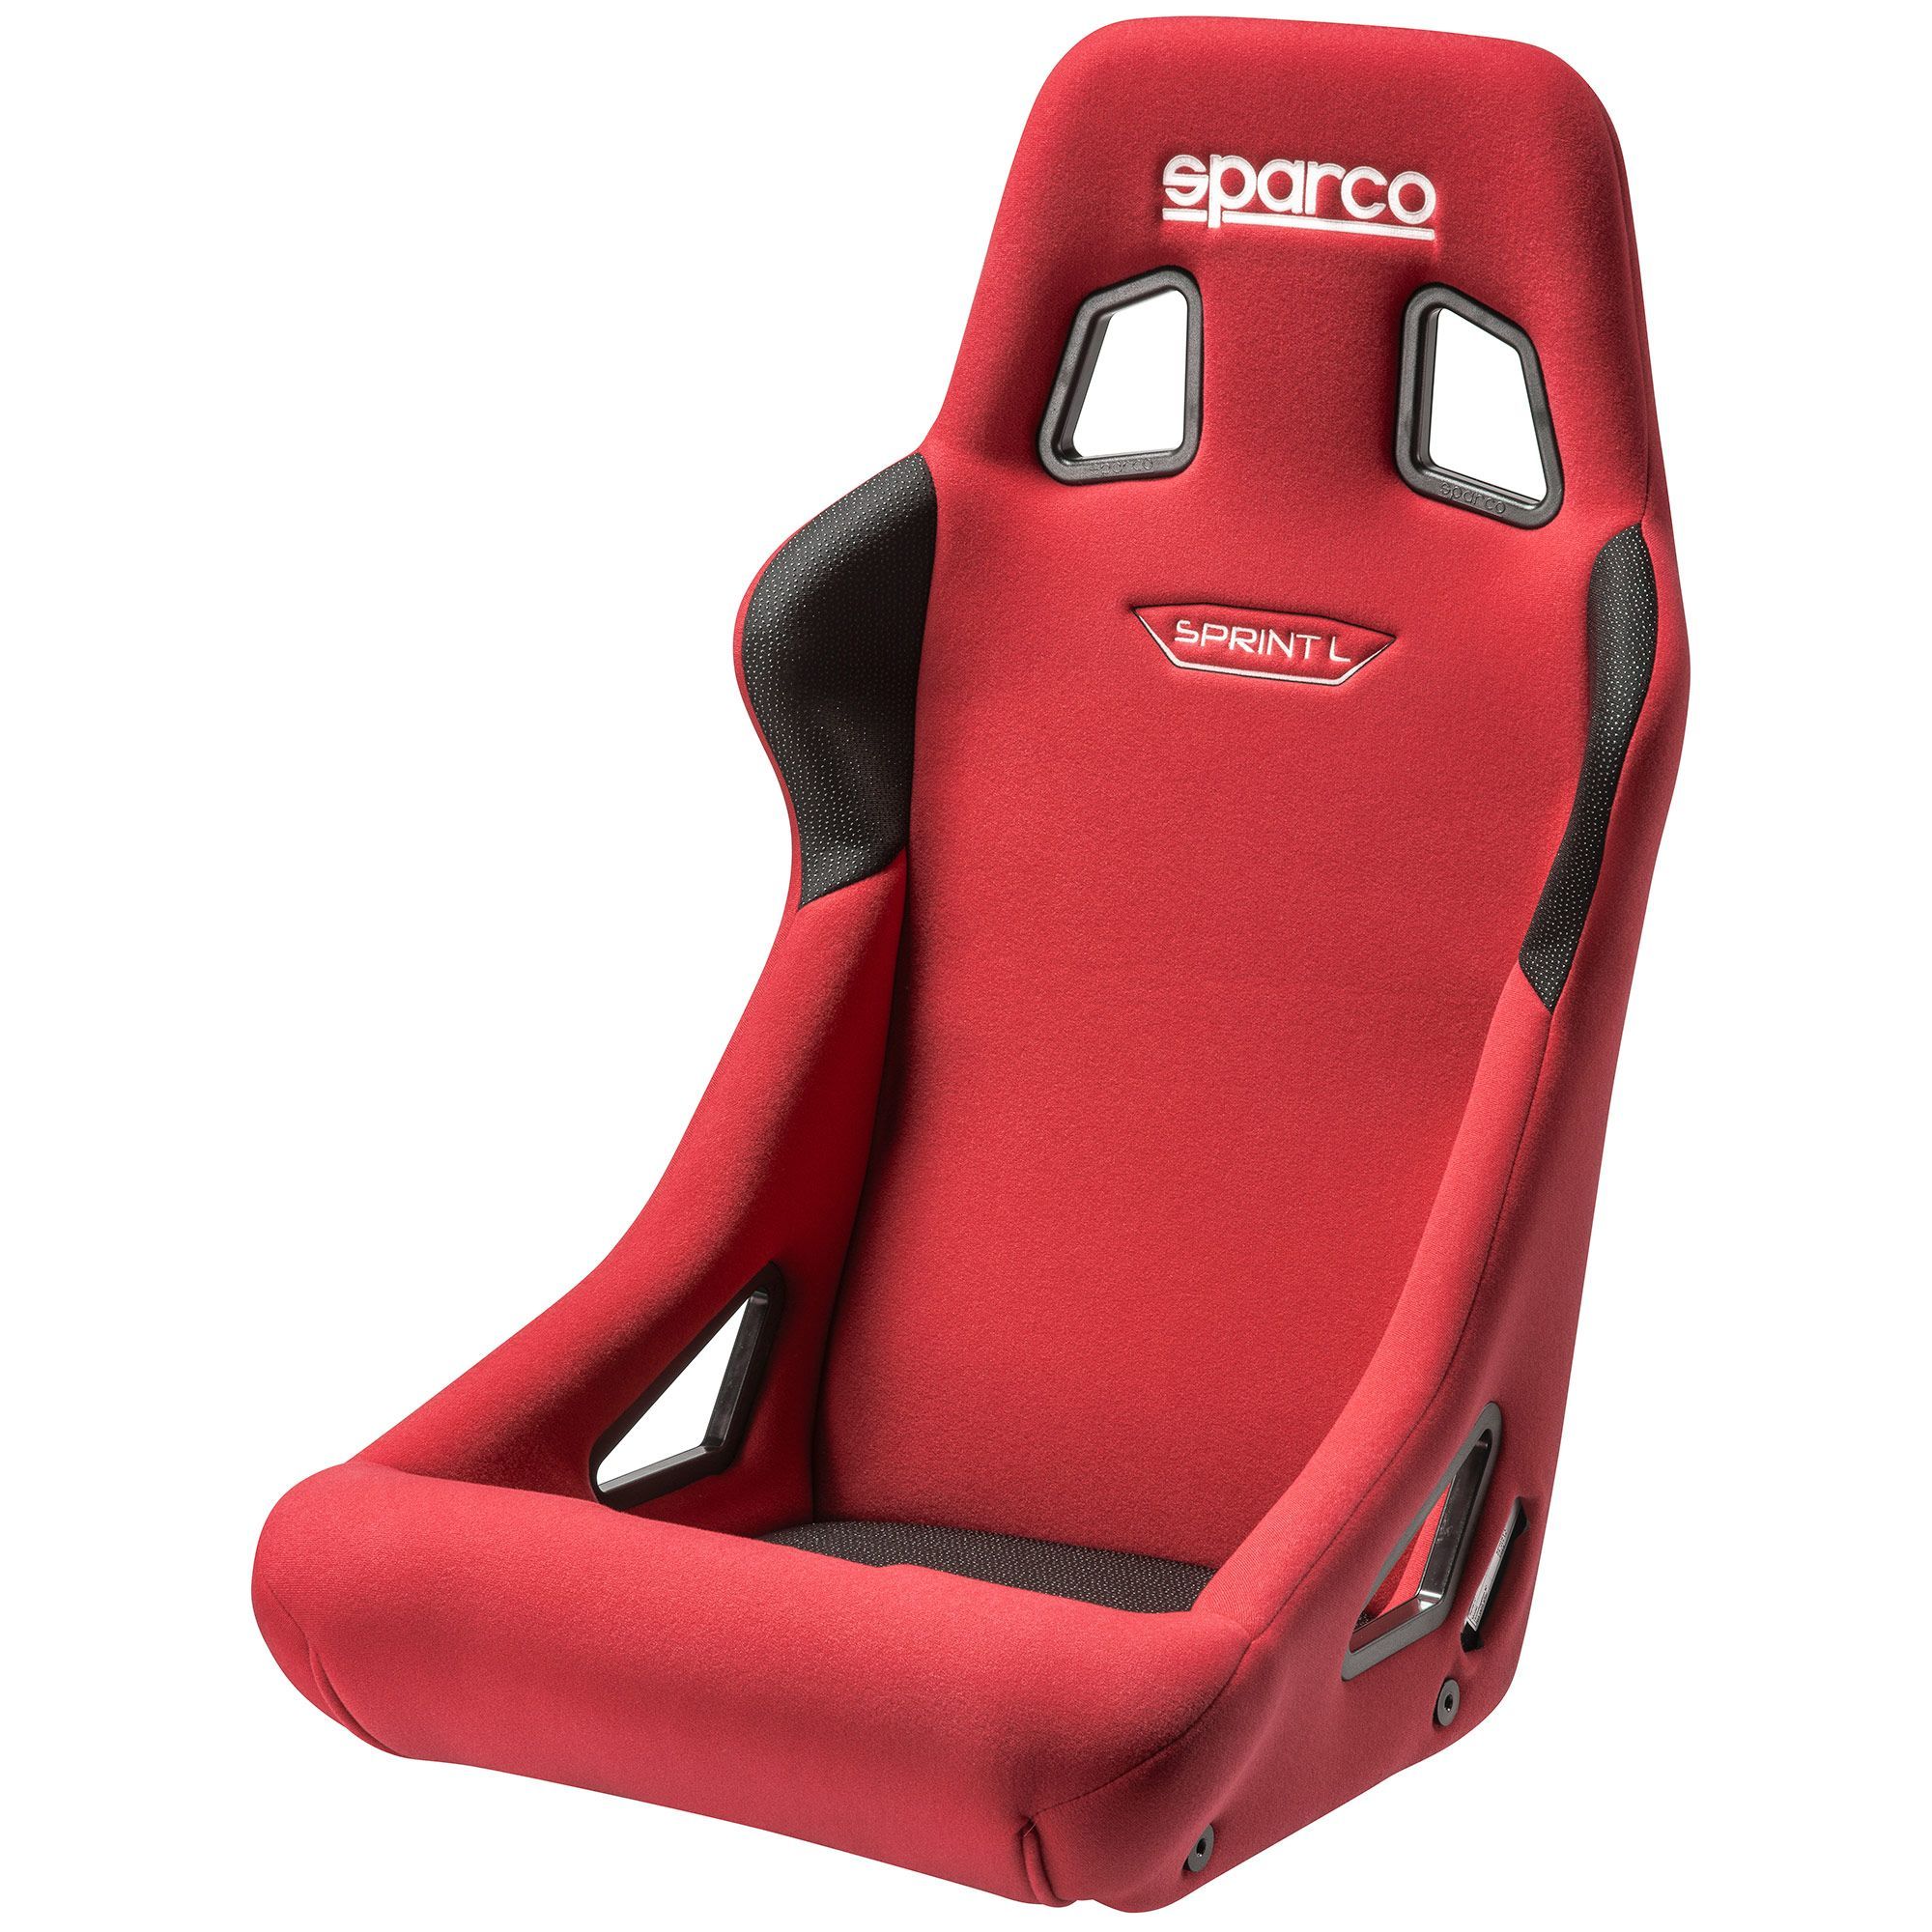 Seat Sparco Sprint L Red